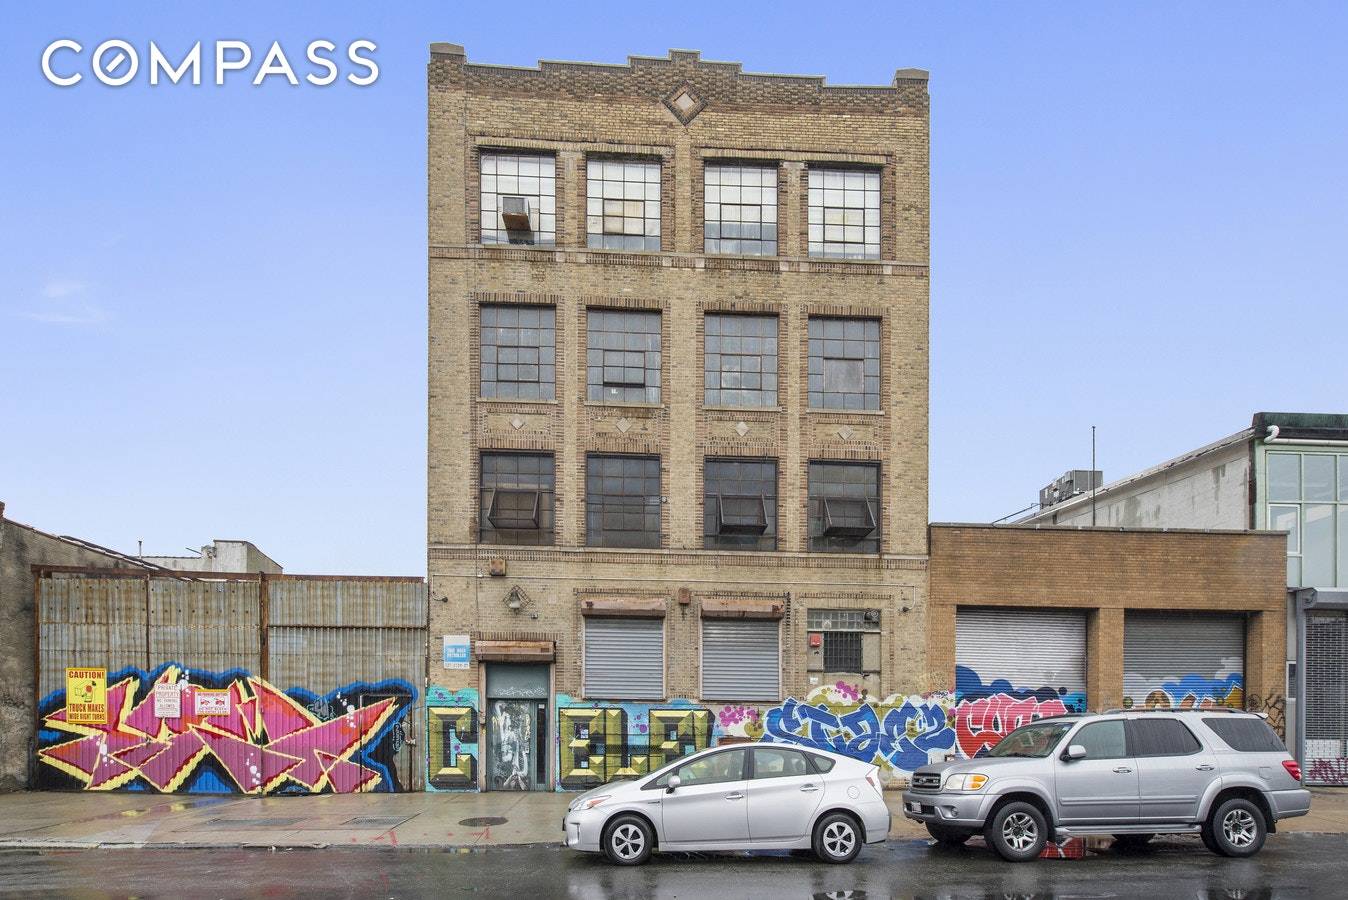 Prime commercial loft space in the heart of East Williamsburg bordering Bushwick.